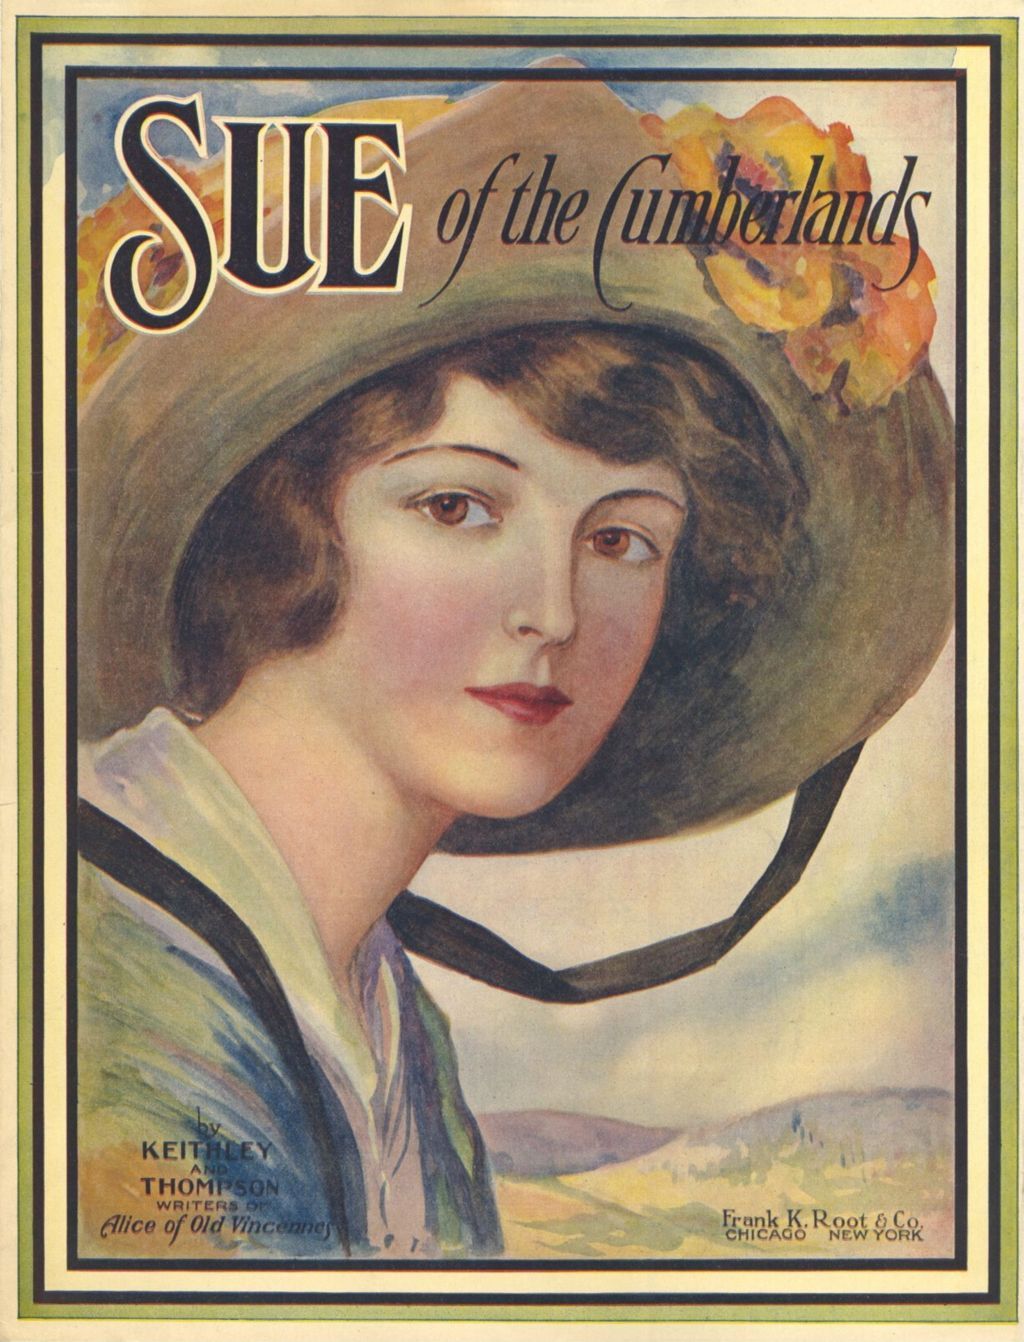 Miniature of Sue of the Cumberlands